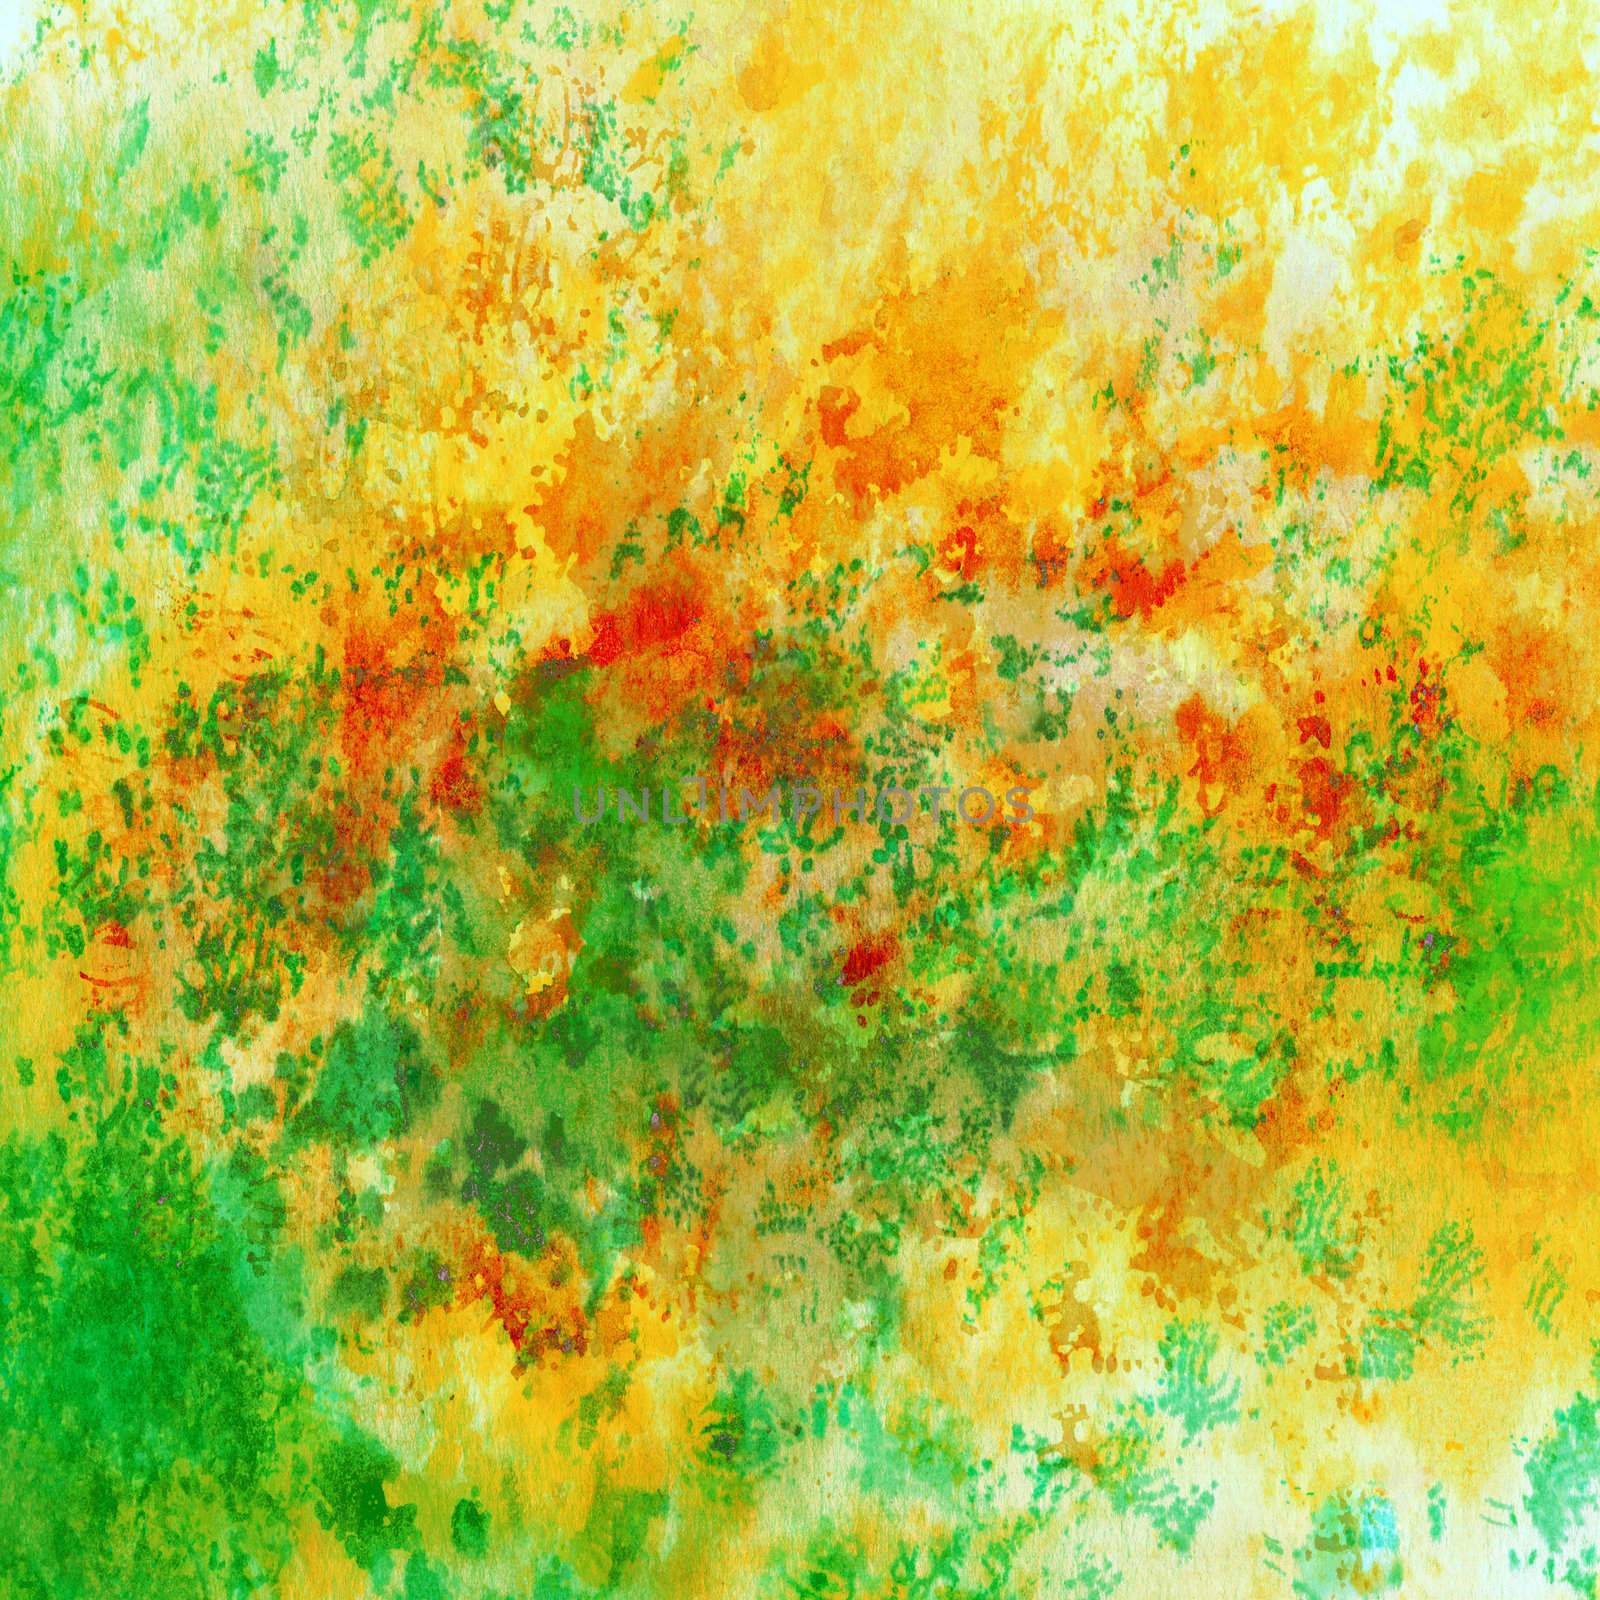 Abstract background, watercolor, beautiful hand painted on a paper. Pink, red, orange, violet, yellow, green